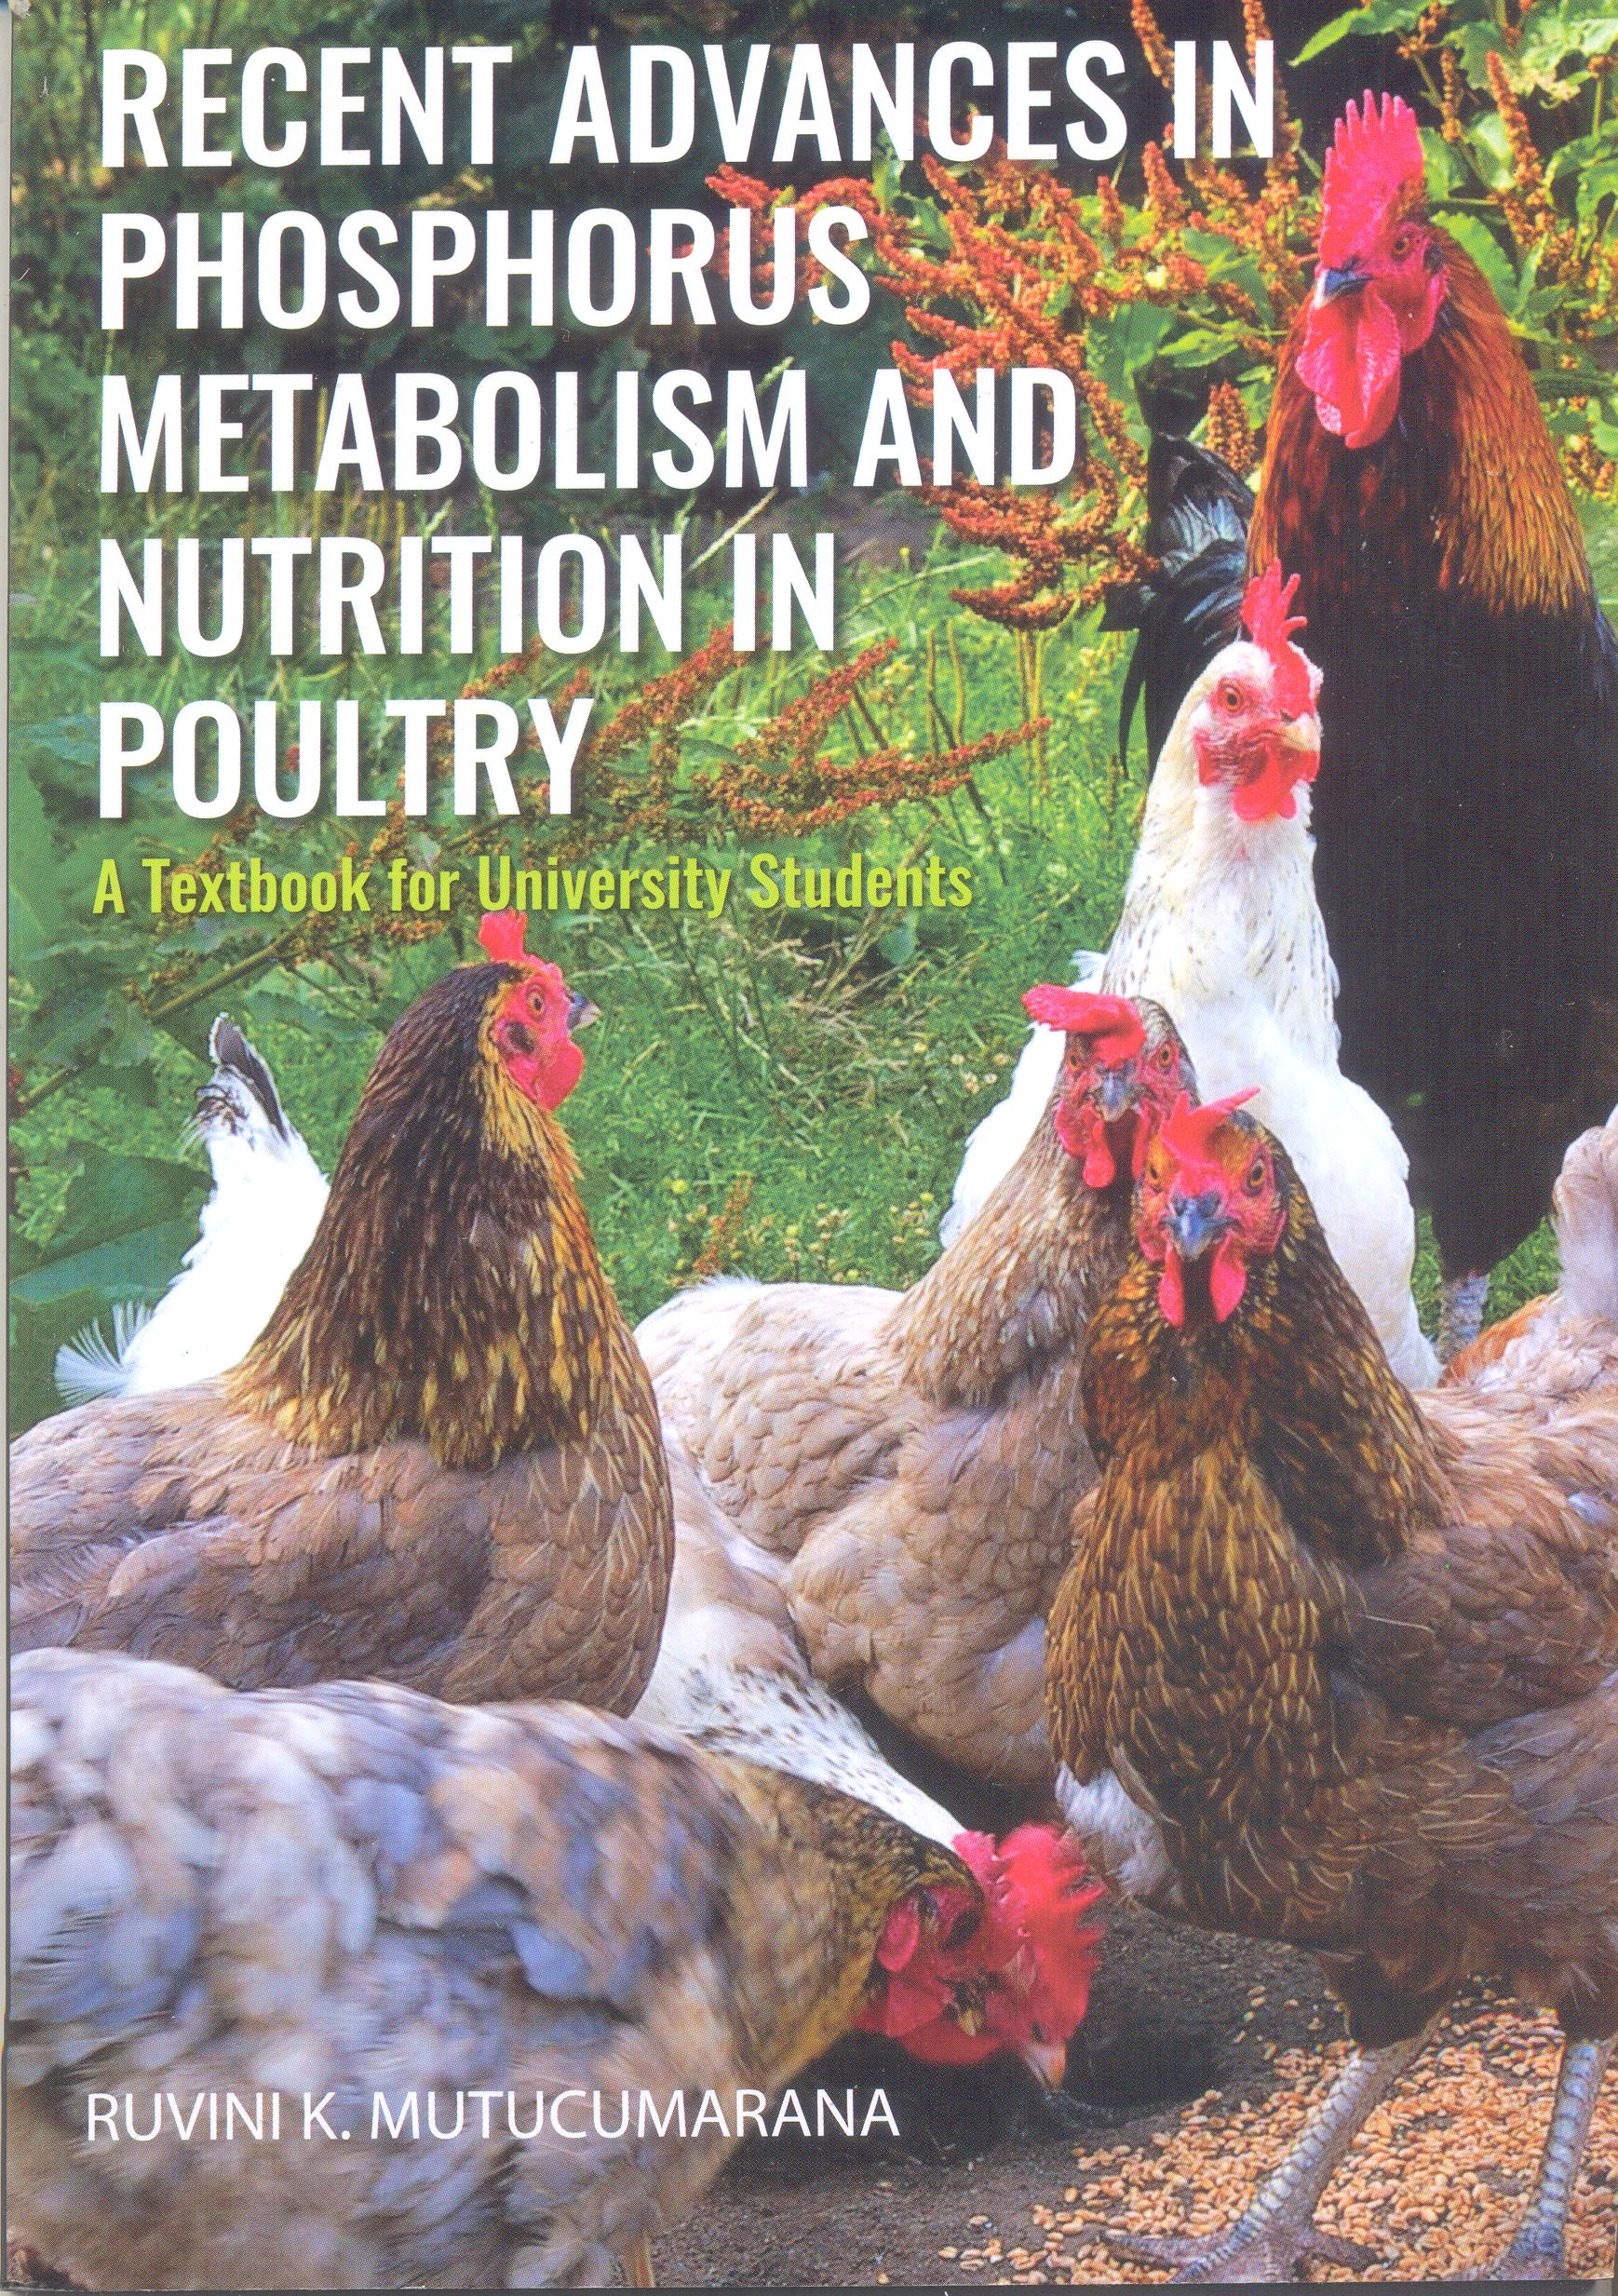 Recent Advances in Phosphorus metabolism and nutrition in poultry